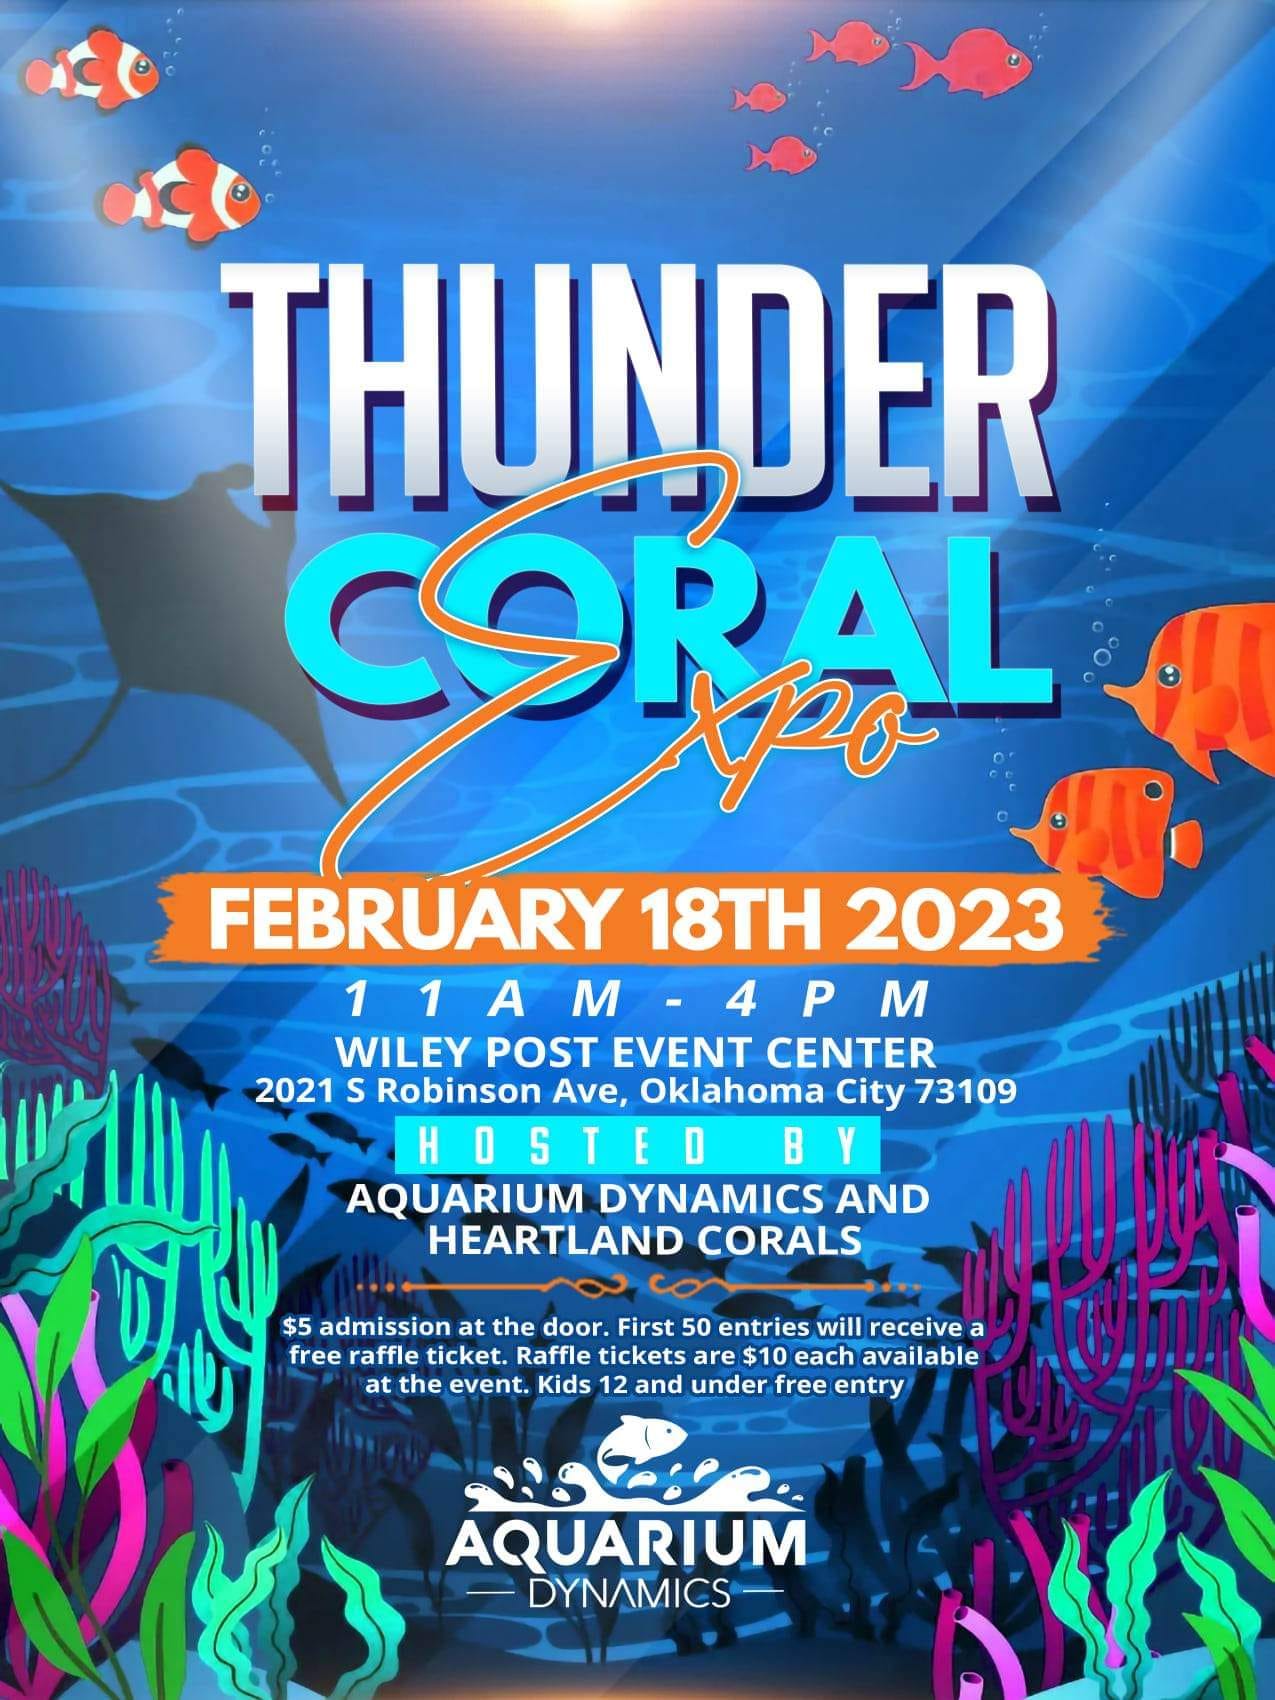 Thunder Coral Expo - Reefs.com